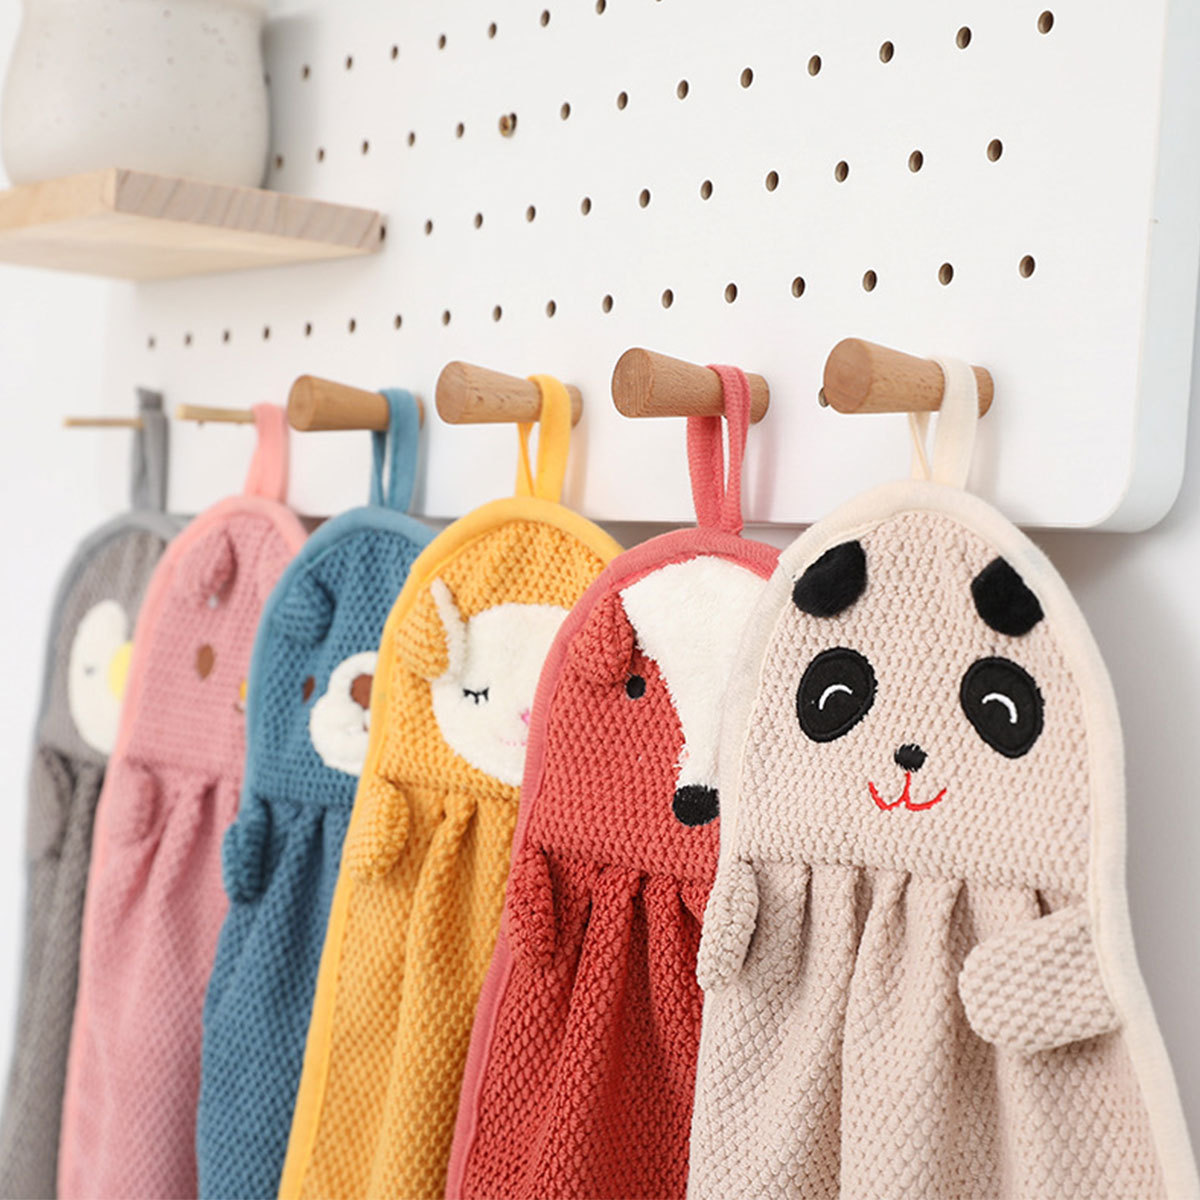  hand towel child loop attaching Mini towel gift lovely animal animal kindergarten child care . Point ..